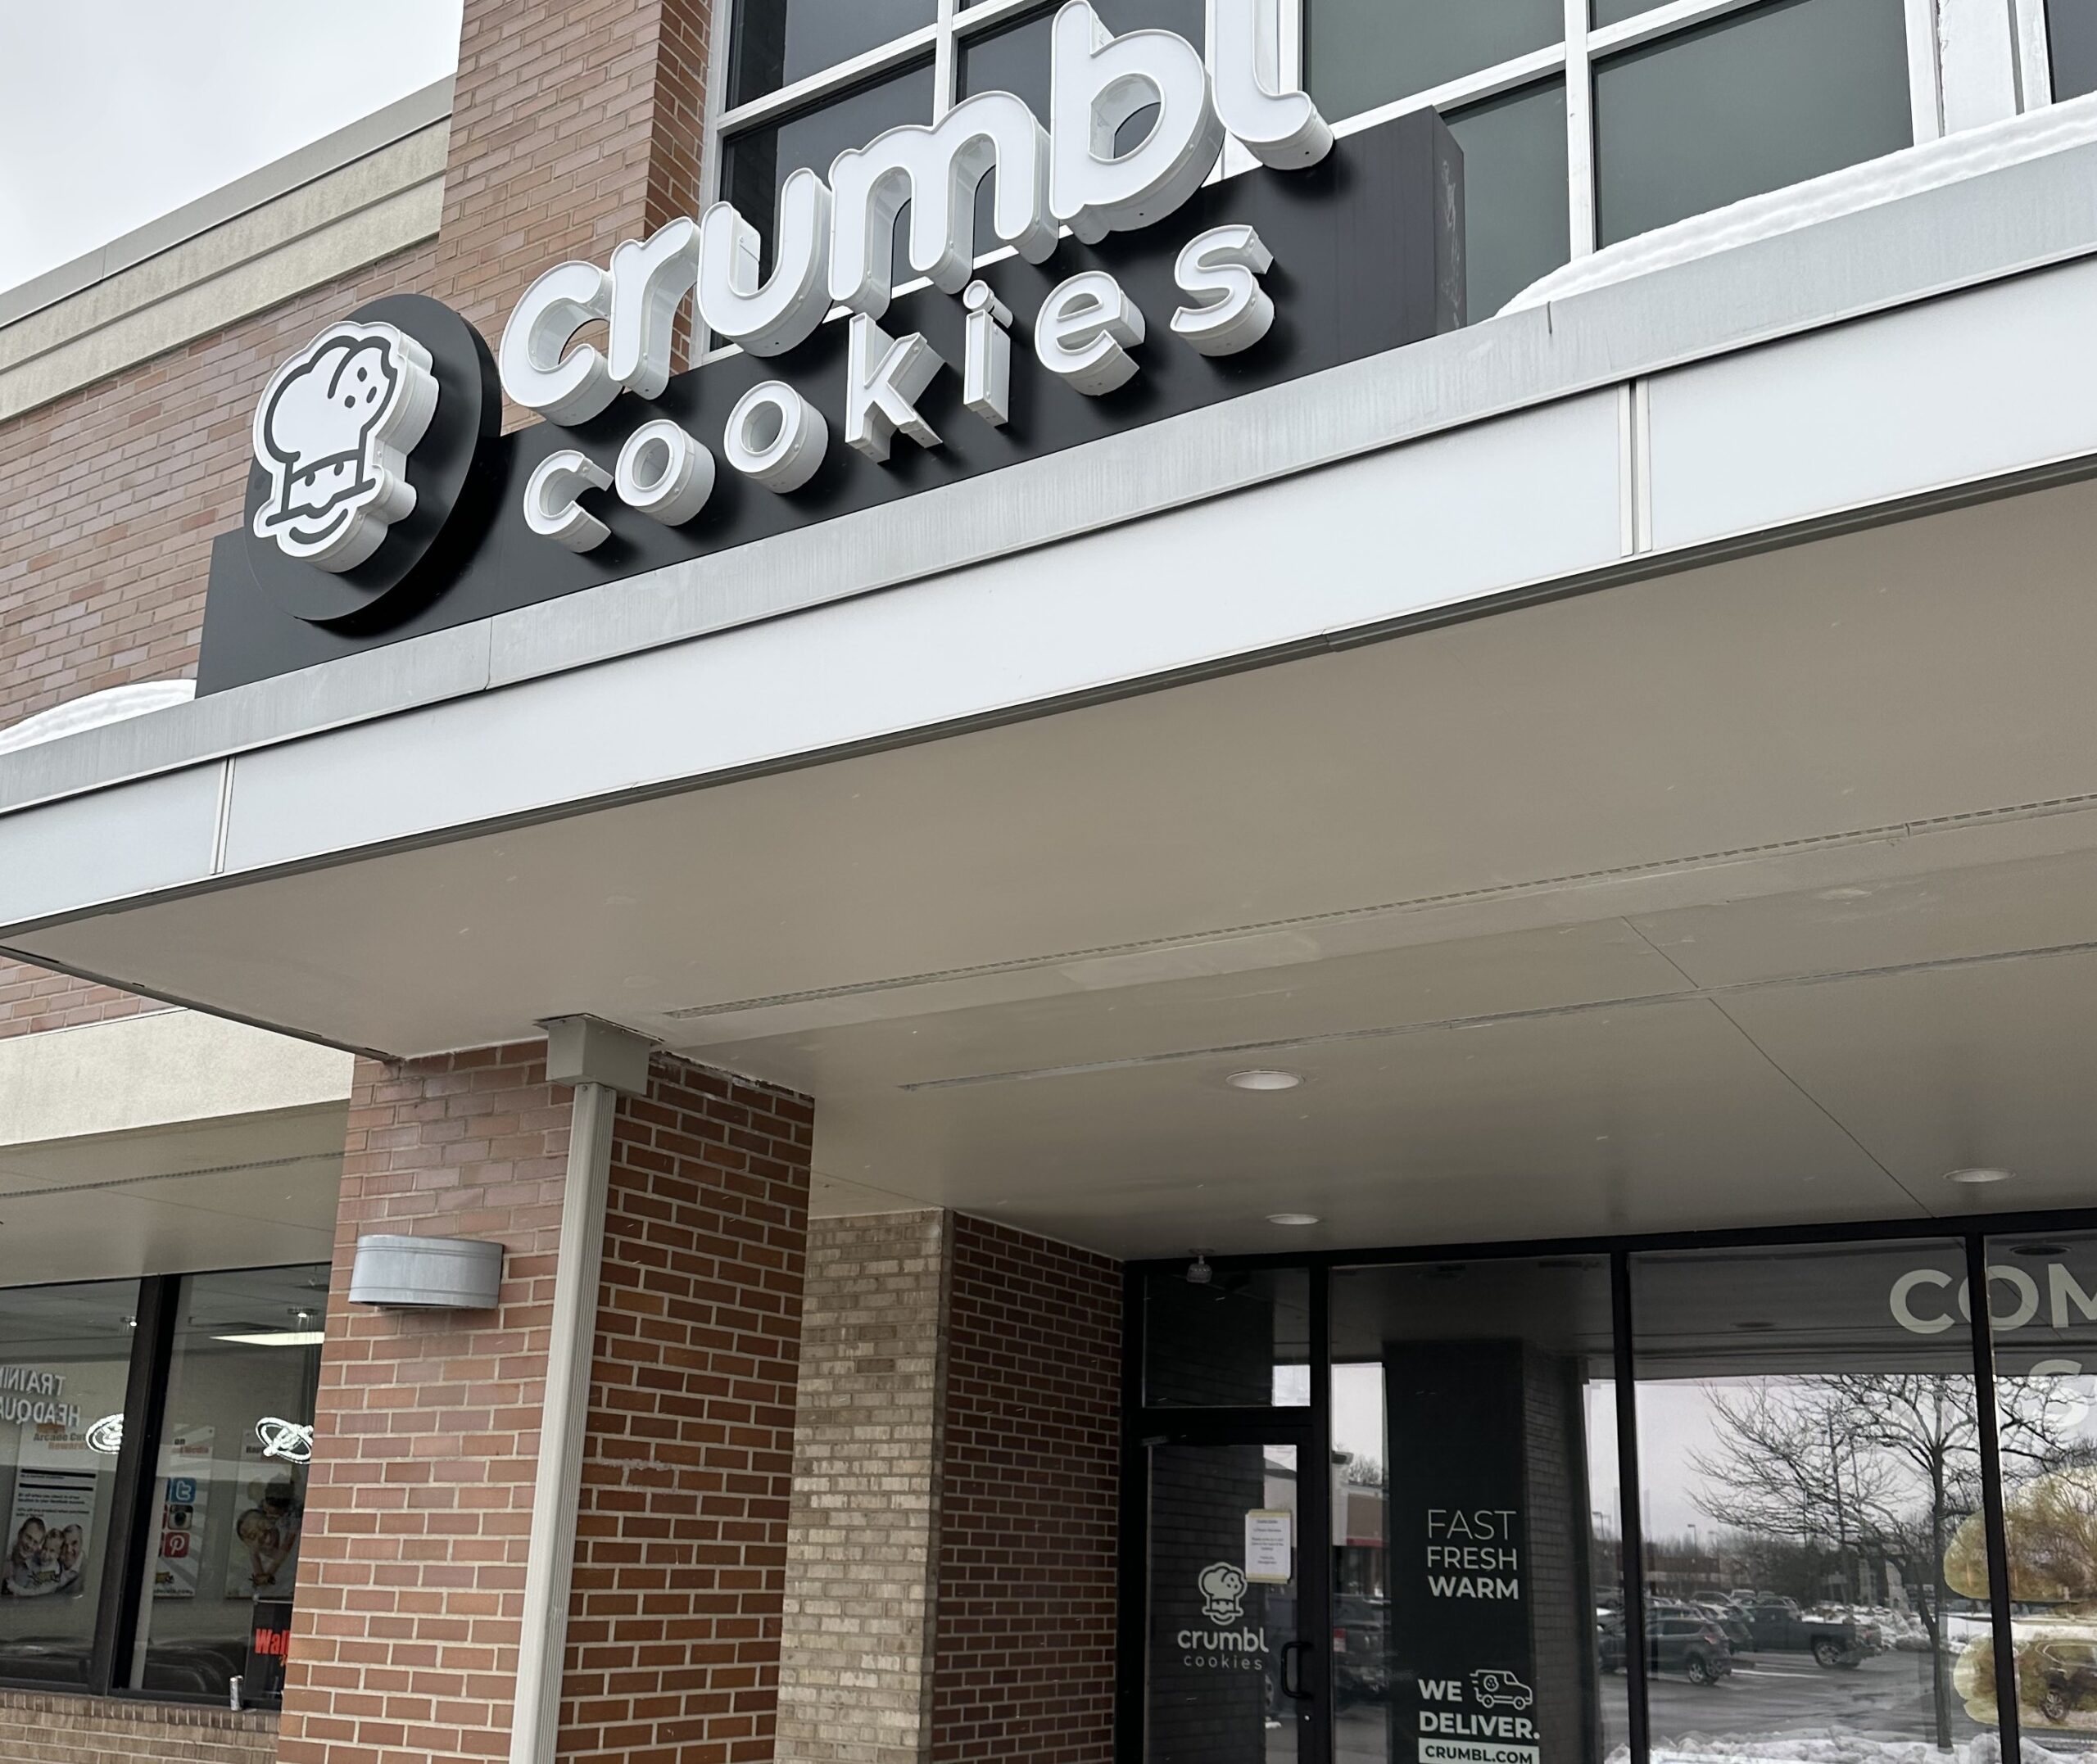 The Crumbl Cookies franchise is projected to open Feb 20 in the Ford road shopping complex that also includes Chuck E Cheese and Aldi